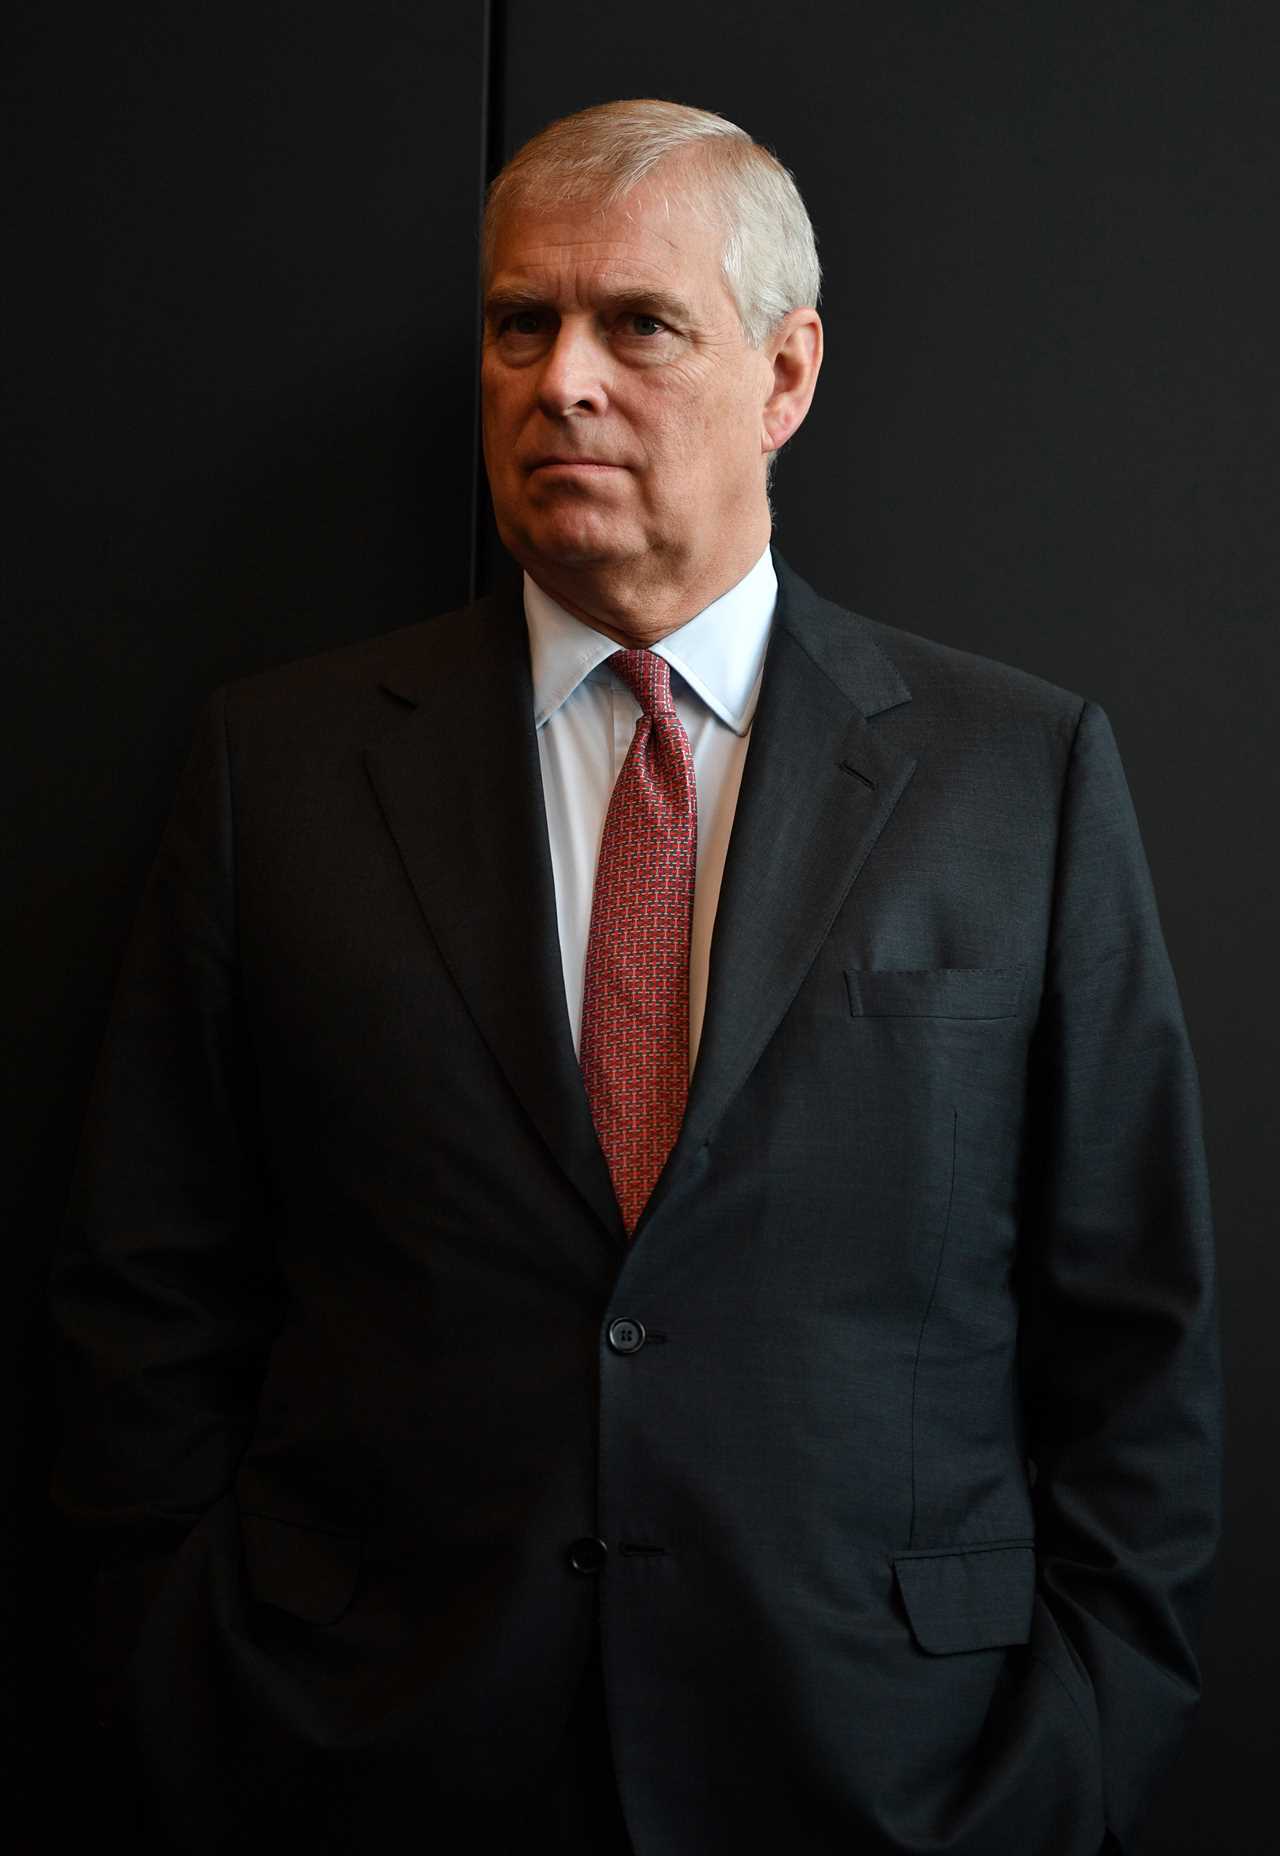 Prince Andrew's Life in Exile: From Royal Jet Setter to Lonely Golf Enthusiast